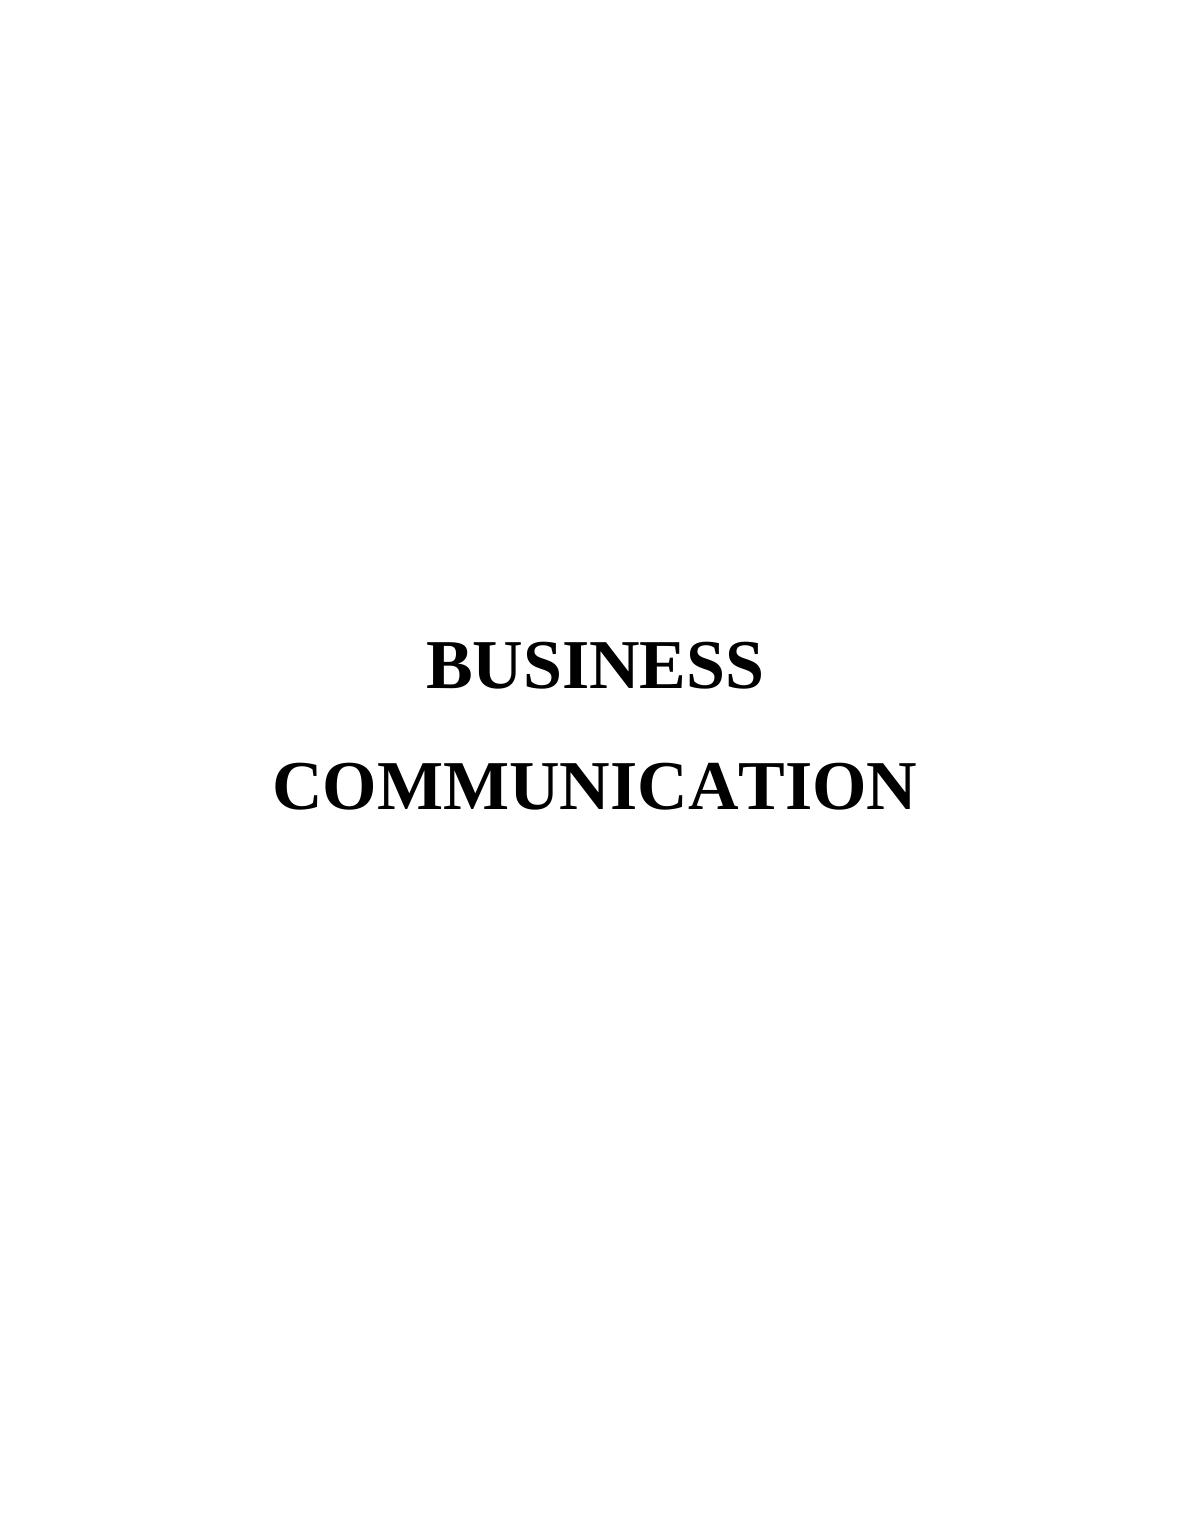 Report on Business Communication_1